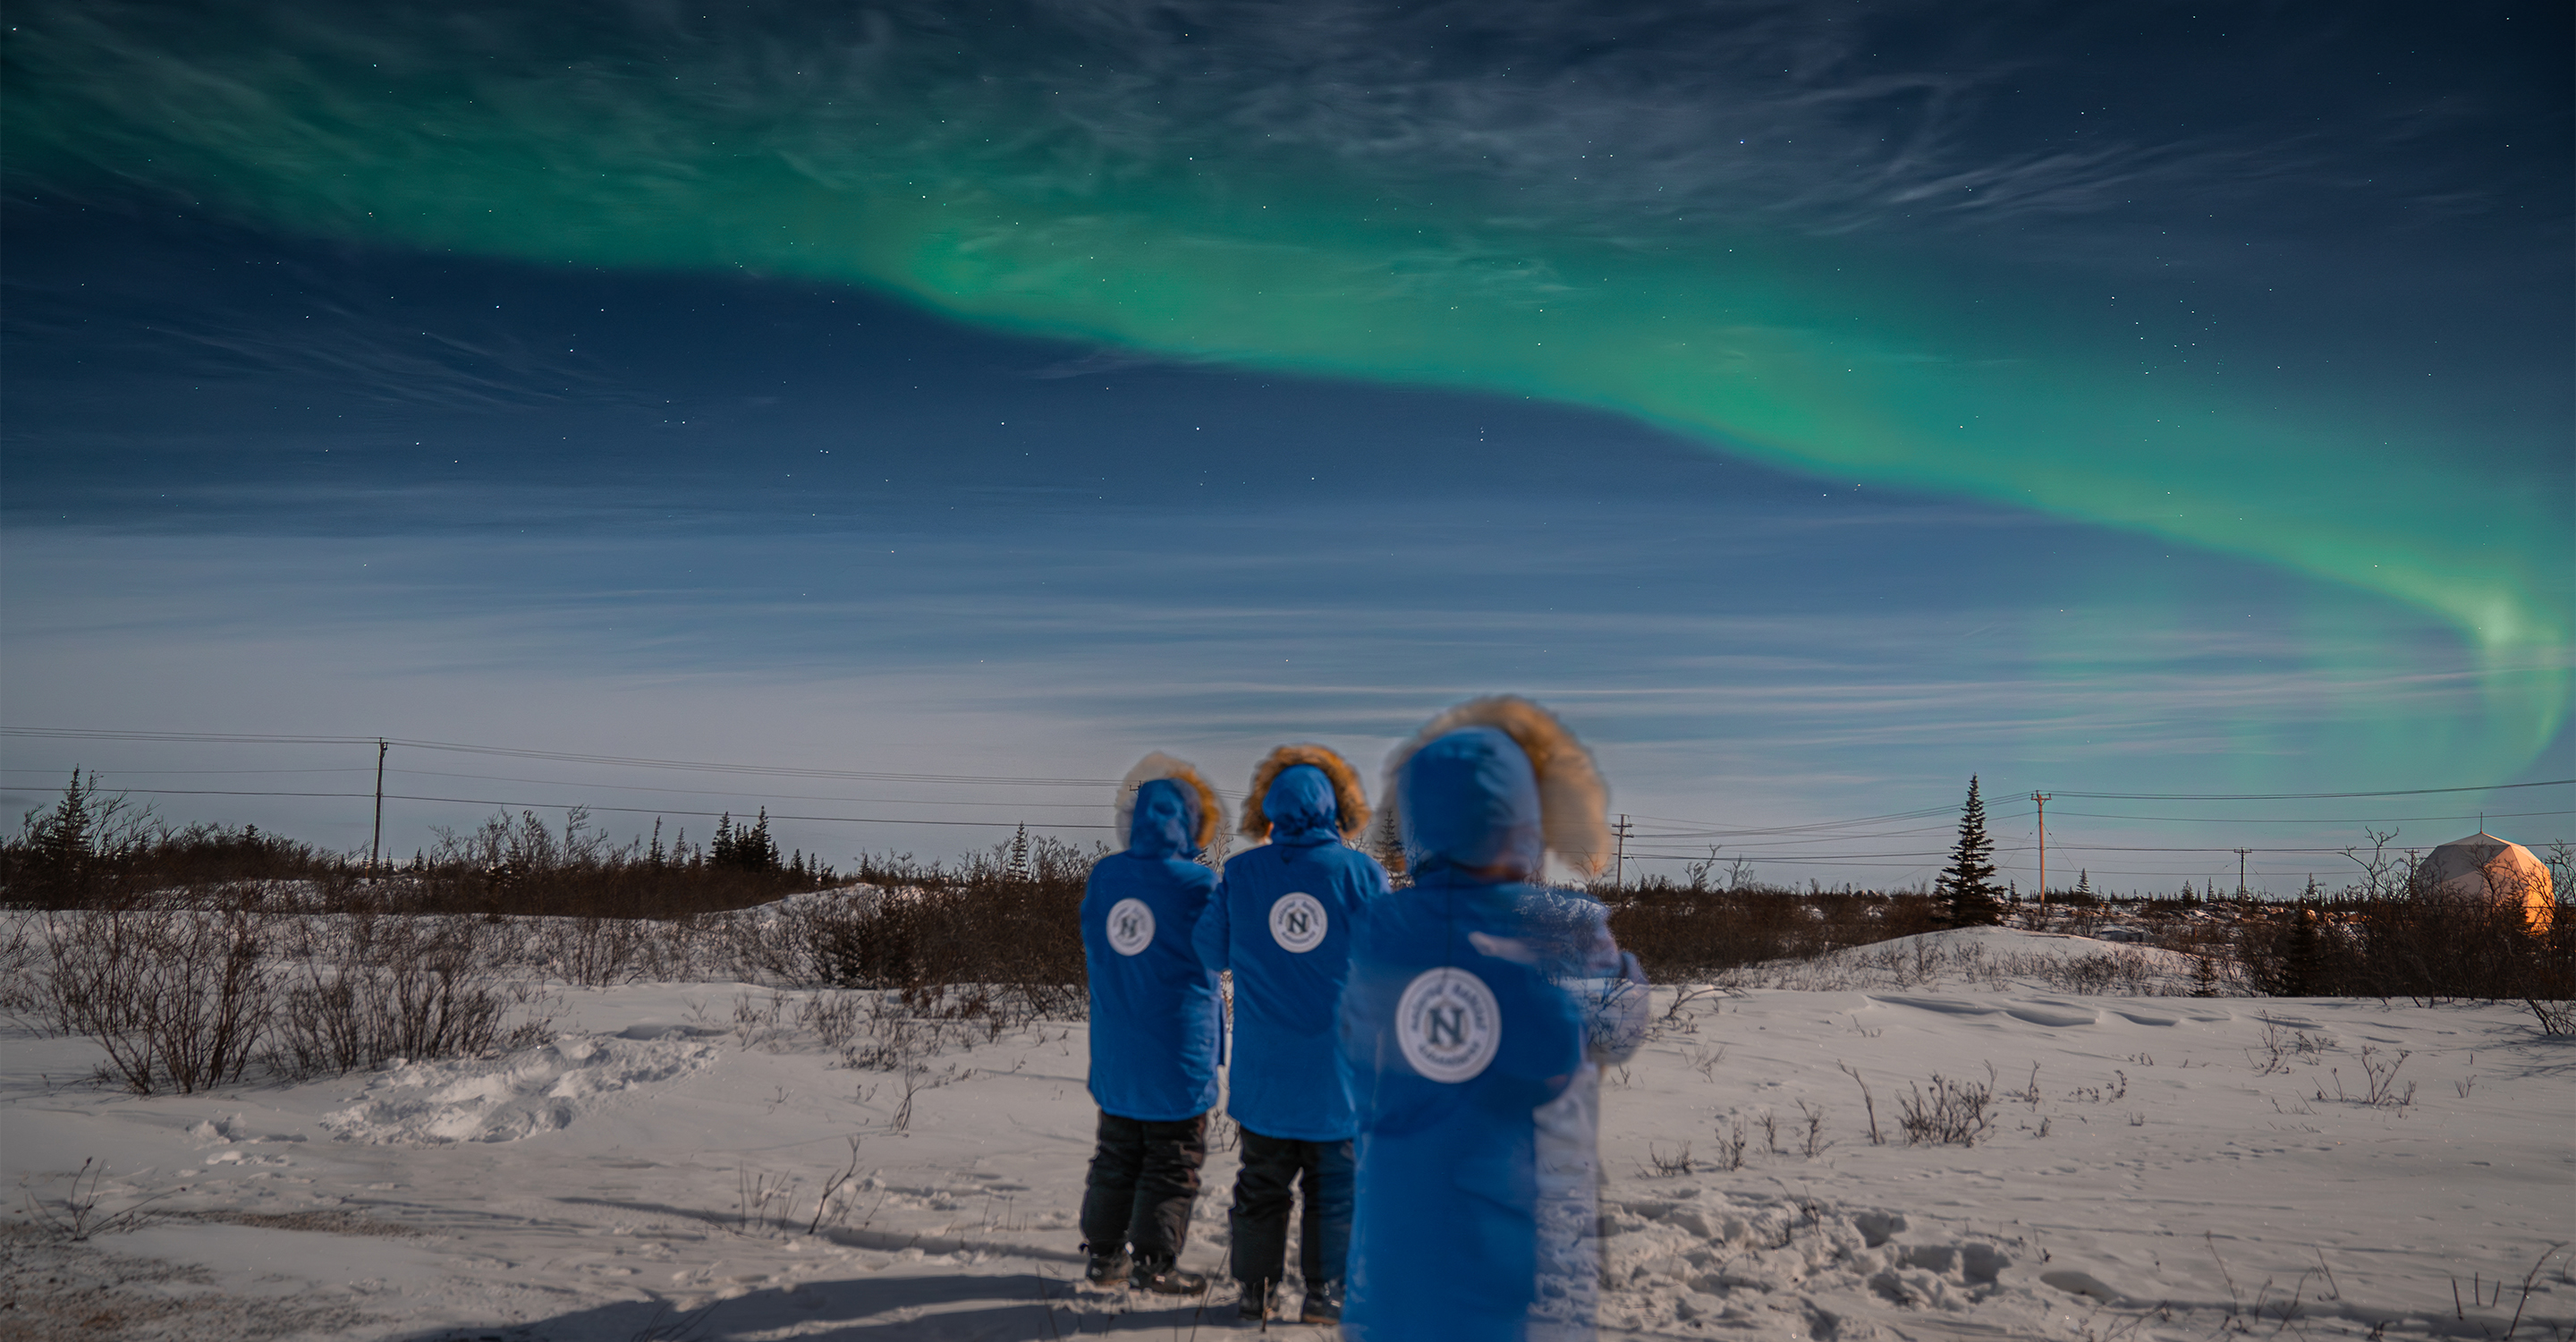 Women in the Wild Northern Lights & Arctic Exploration.